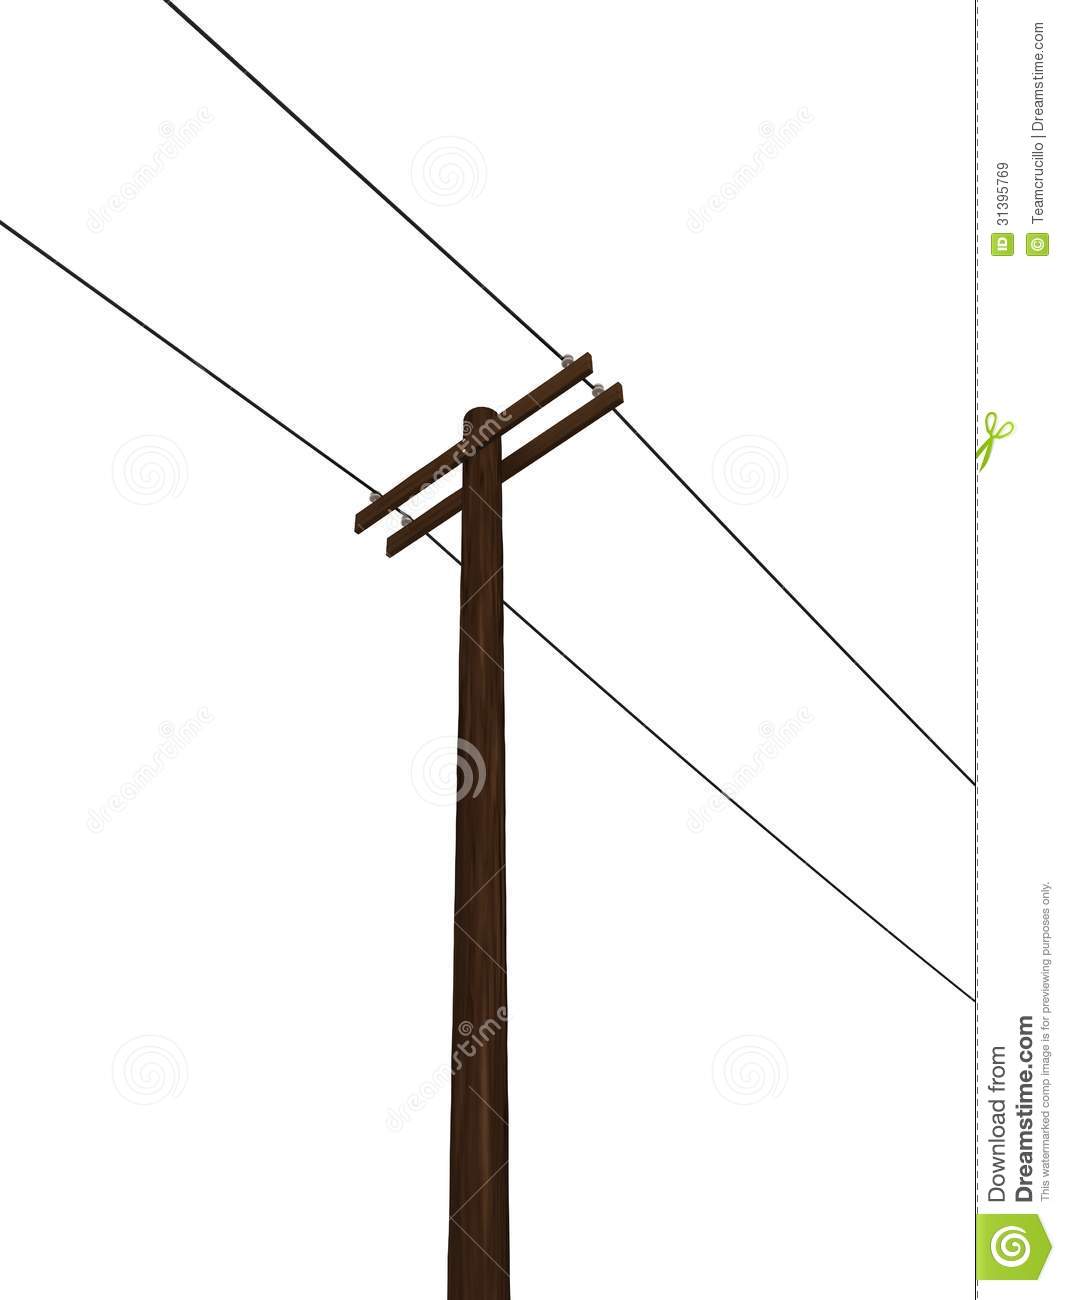 Power Pole Clipart 3d Rendered Power Pole Royalty Free Stock Images